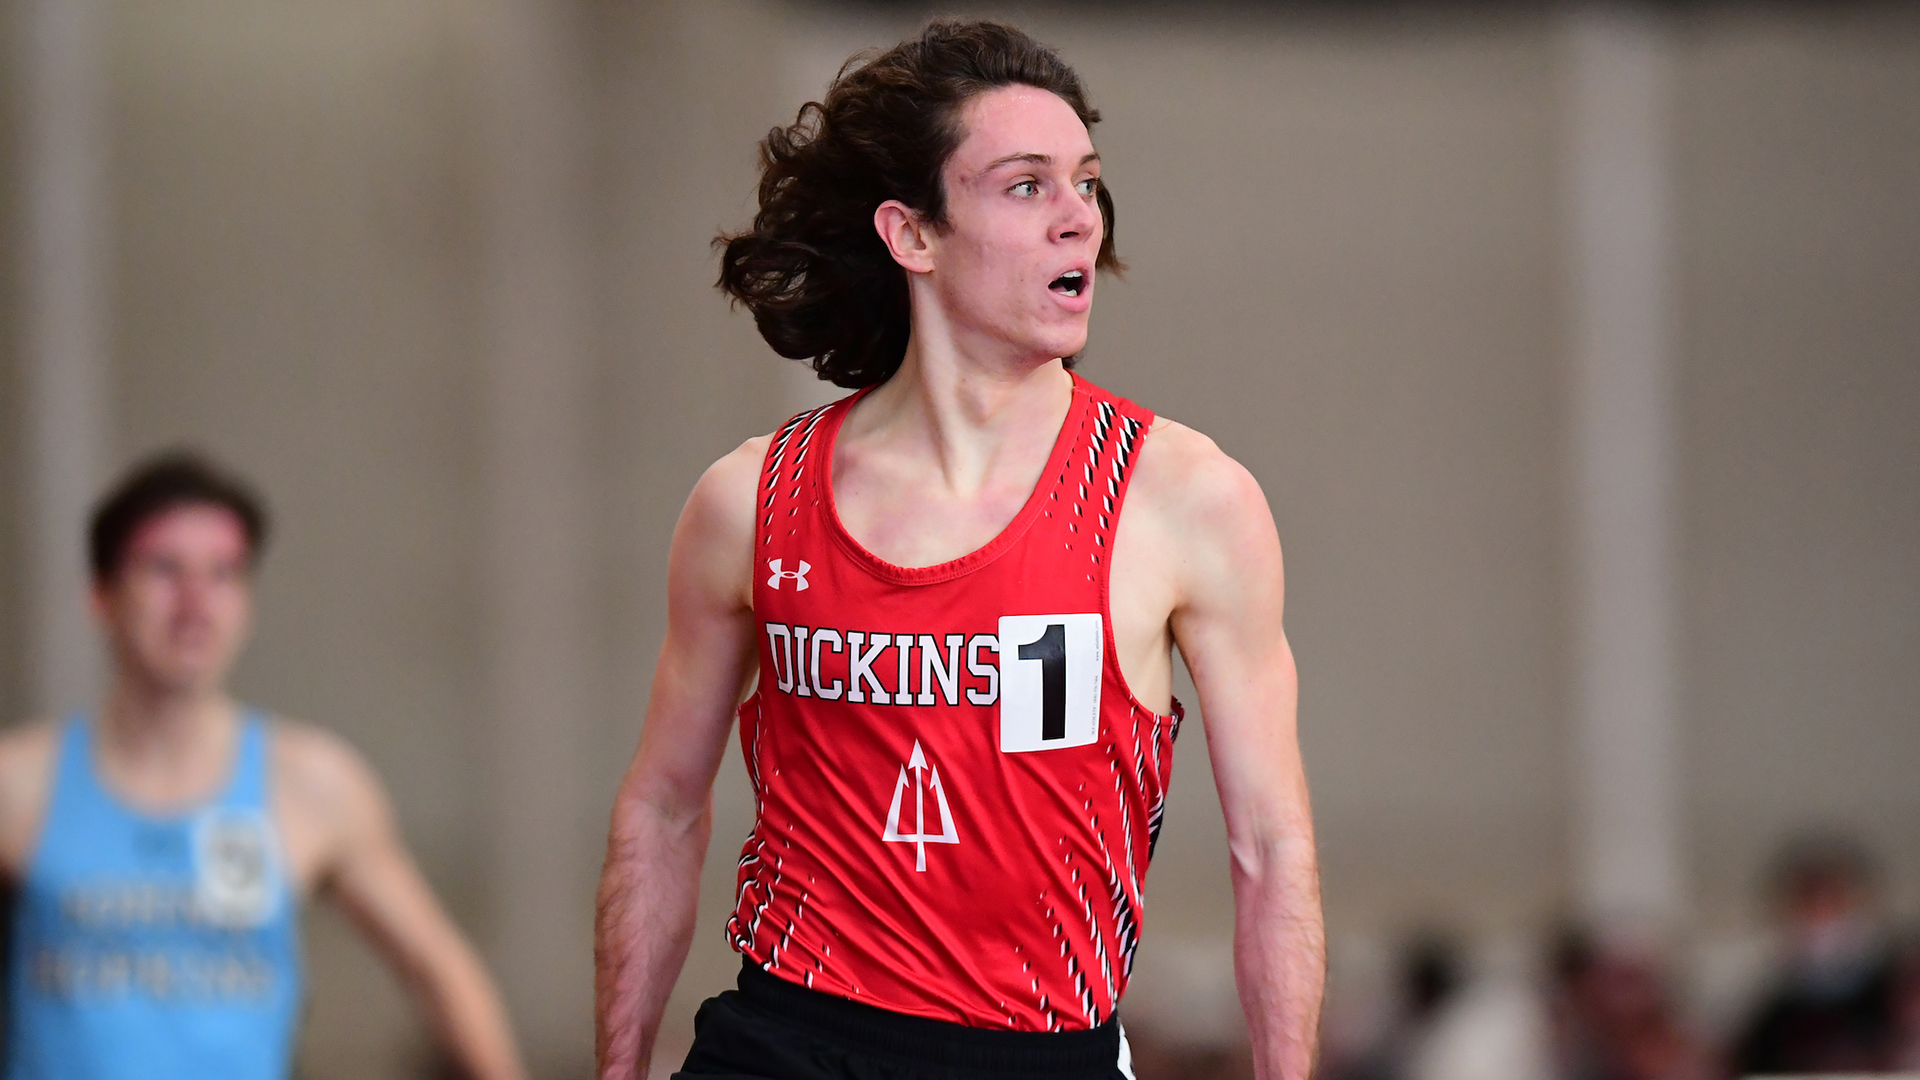 Christopher Scharf, Dickinson, Track Most Outstanding Performer